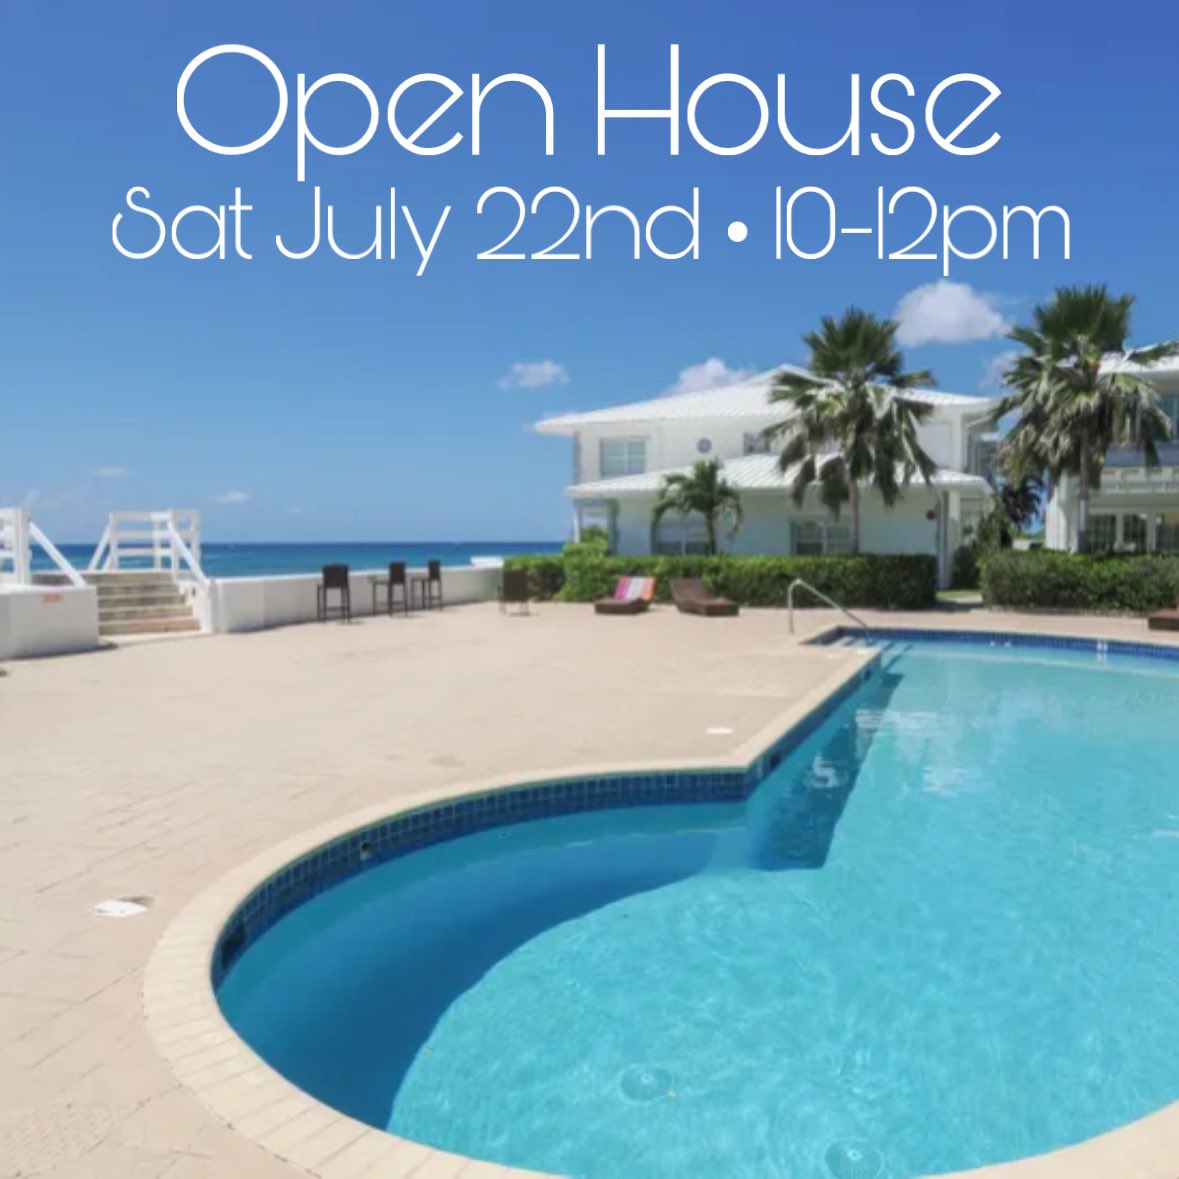 OPEN HOUSE
Windsor Village 4
July 22nd • 10-12pm

This upgraded 2 bed/2.5 bath oceanfront unit offers wonderful sea views from the main floor living space

Member of CIREBA 
MLS # 415810

#OpenHouseSaturday #Condo
#CaymanRealEstate  #caymansothebysrealty #caymanislandsrealestate